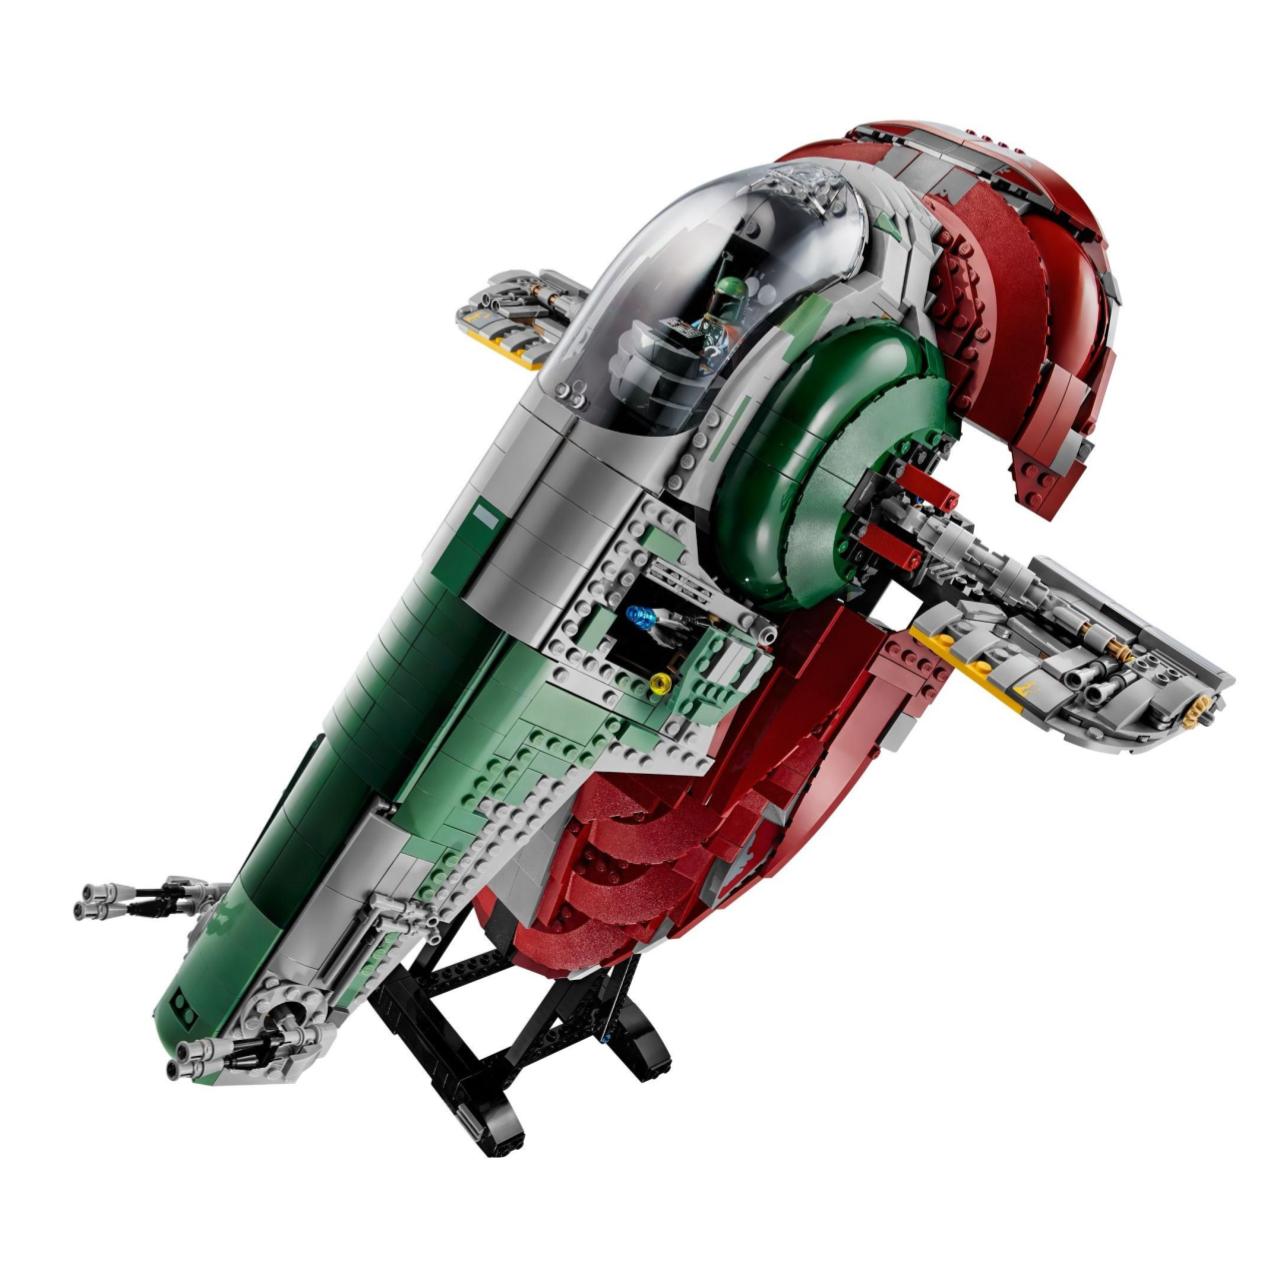 LION KING 180010 Slave I with 1996 pieces 2 - LEPIN Germany